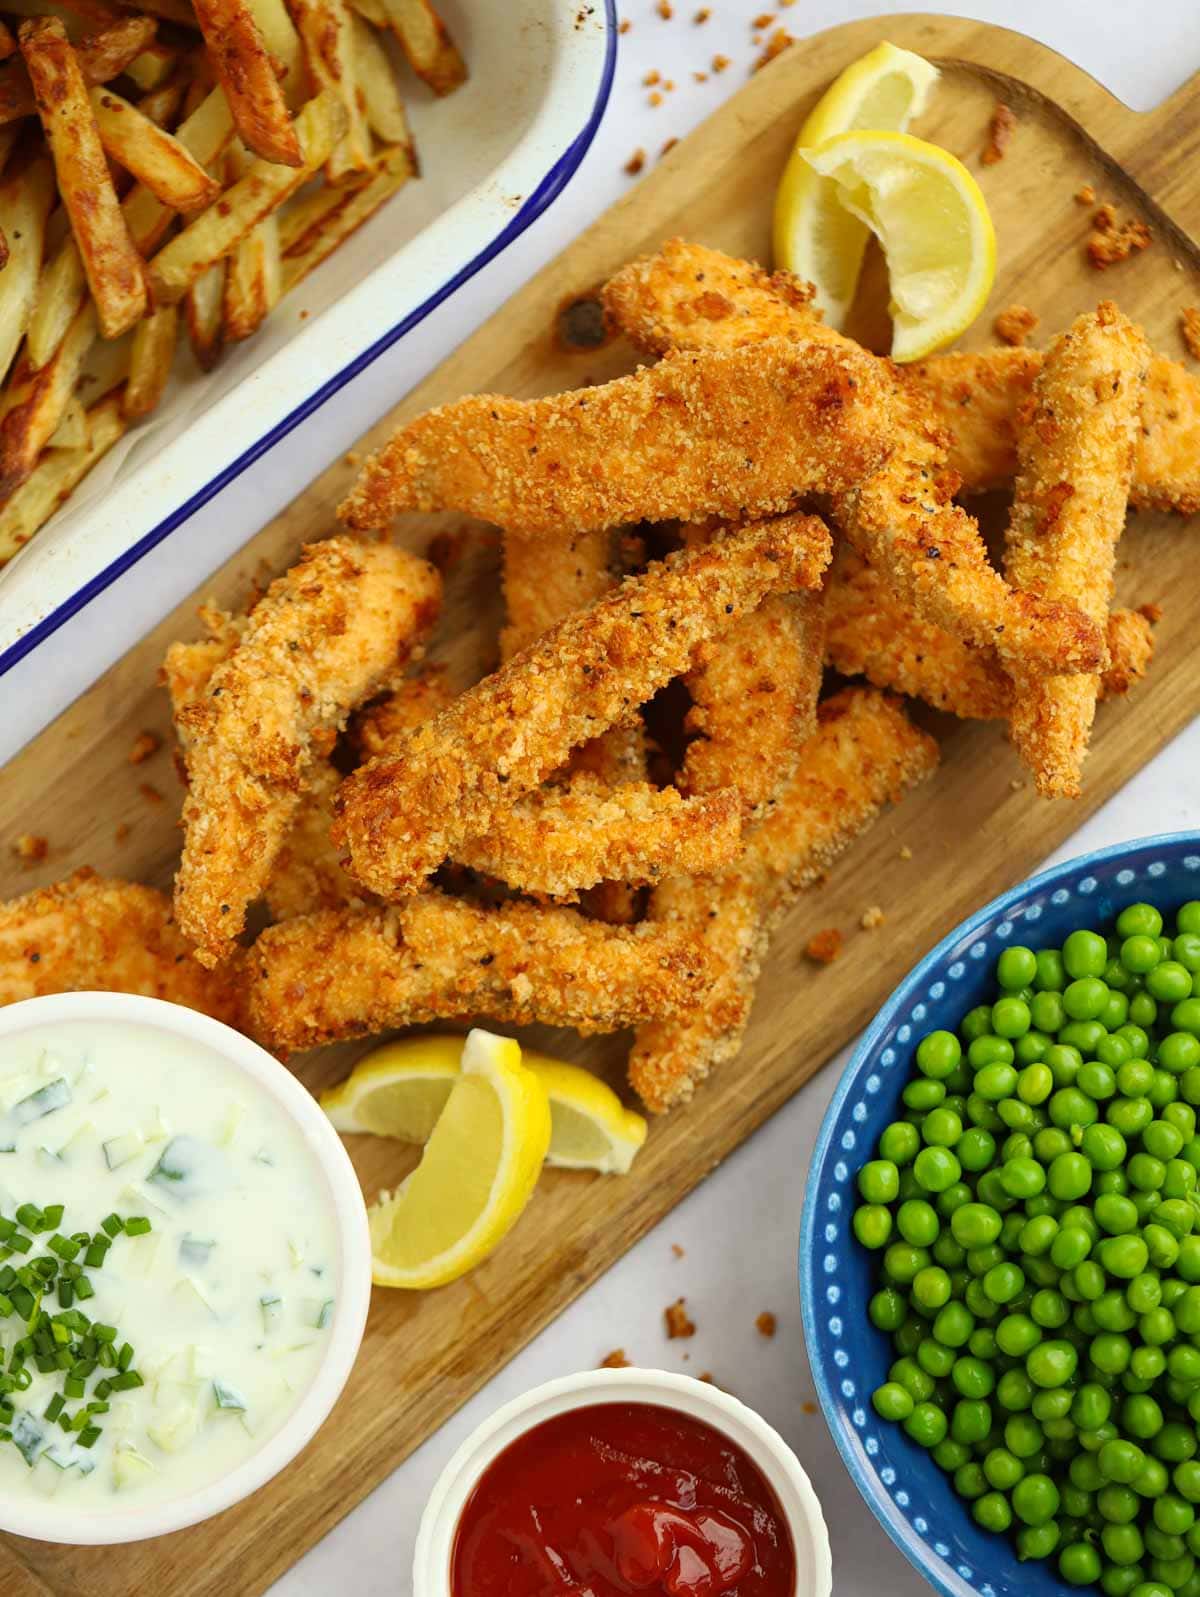 Homemade salmon fish fingers recipe for the whole family